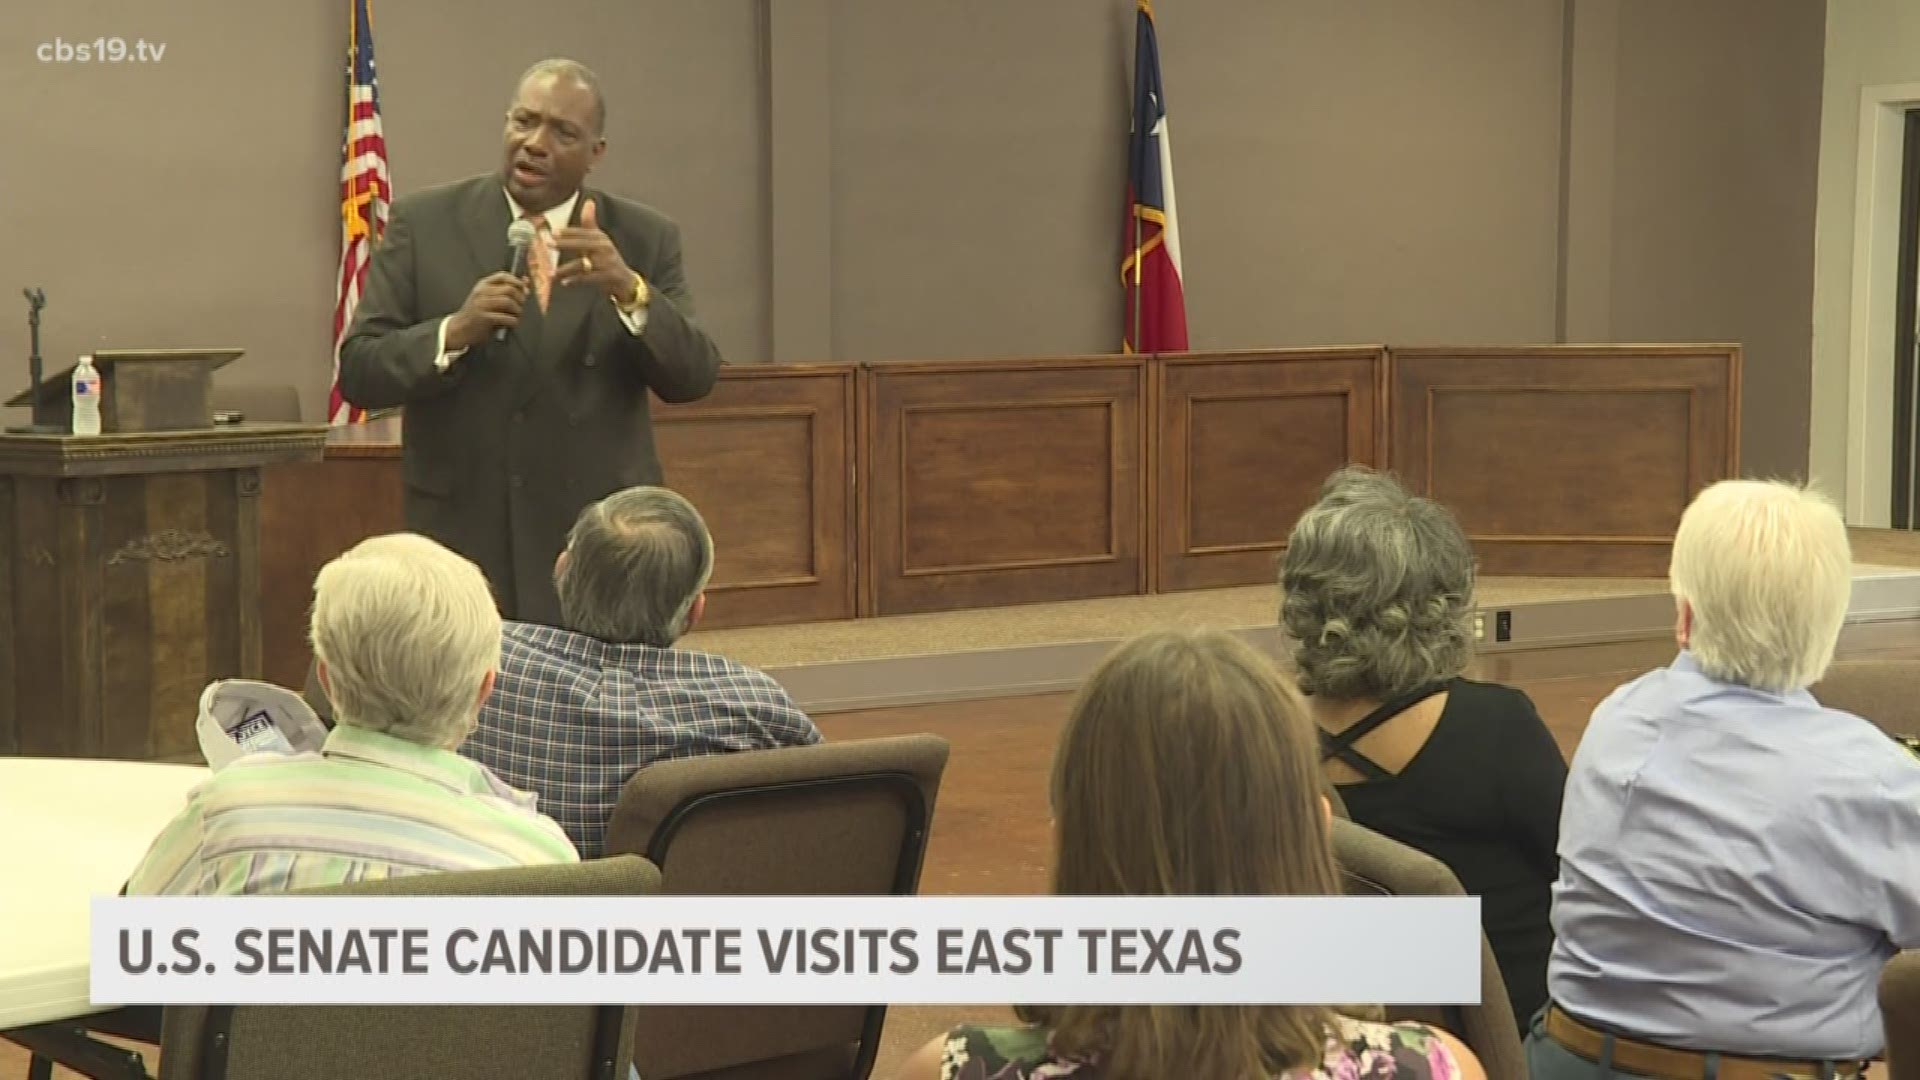 State Senator Royce West discussed his experience and values that would qualify him for the U.S. Senate during a meet and greet in Tyler.